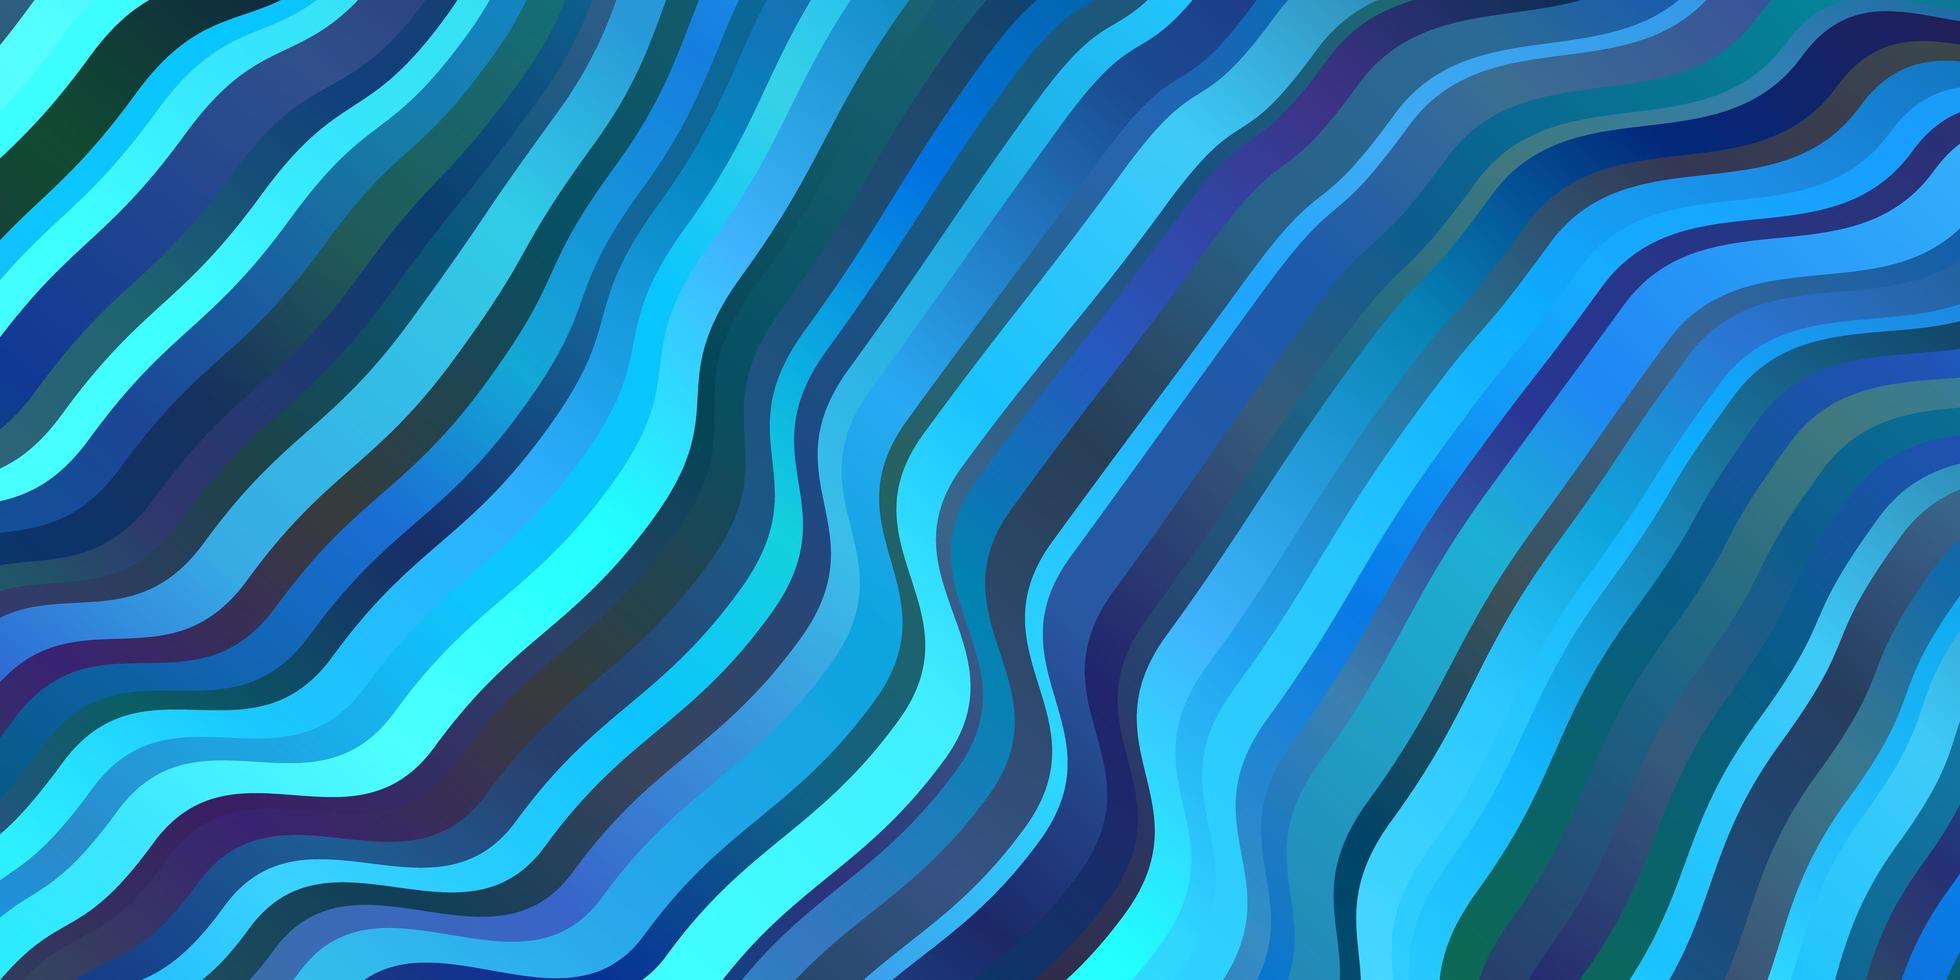 Dark BLUE vector background with curves.